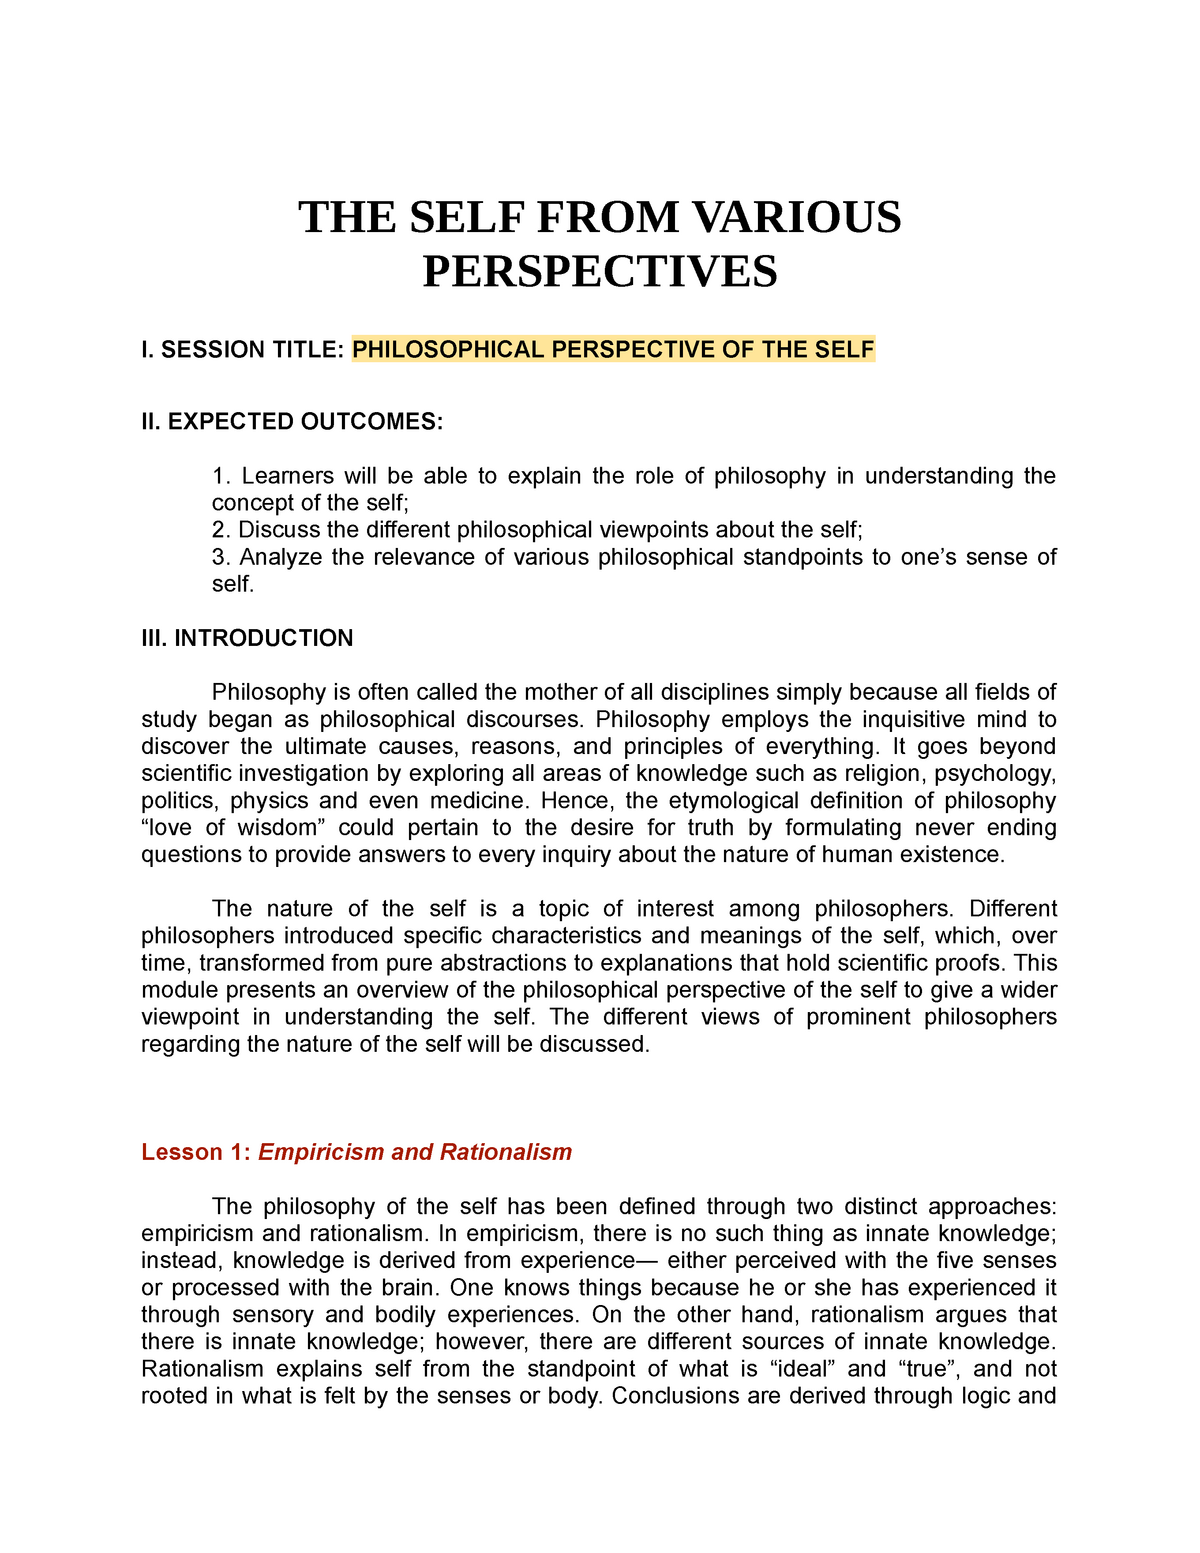 philosophical perspective of self essay brainly